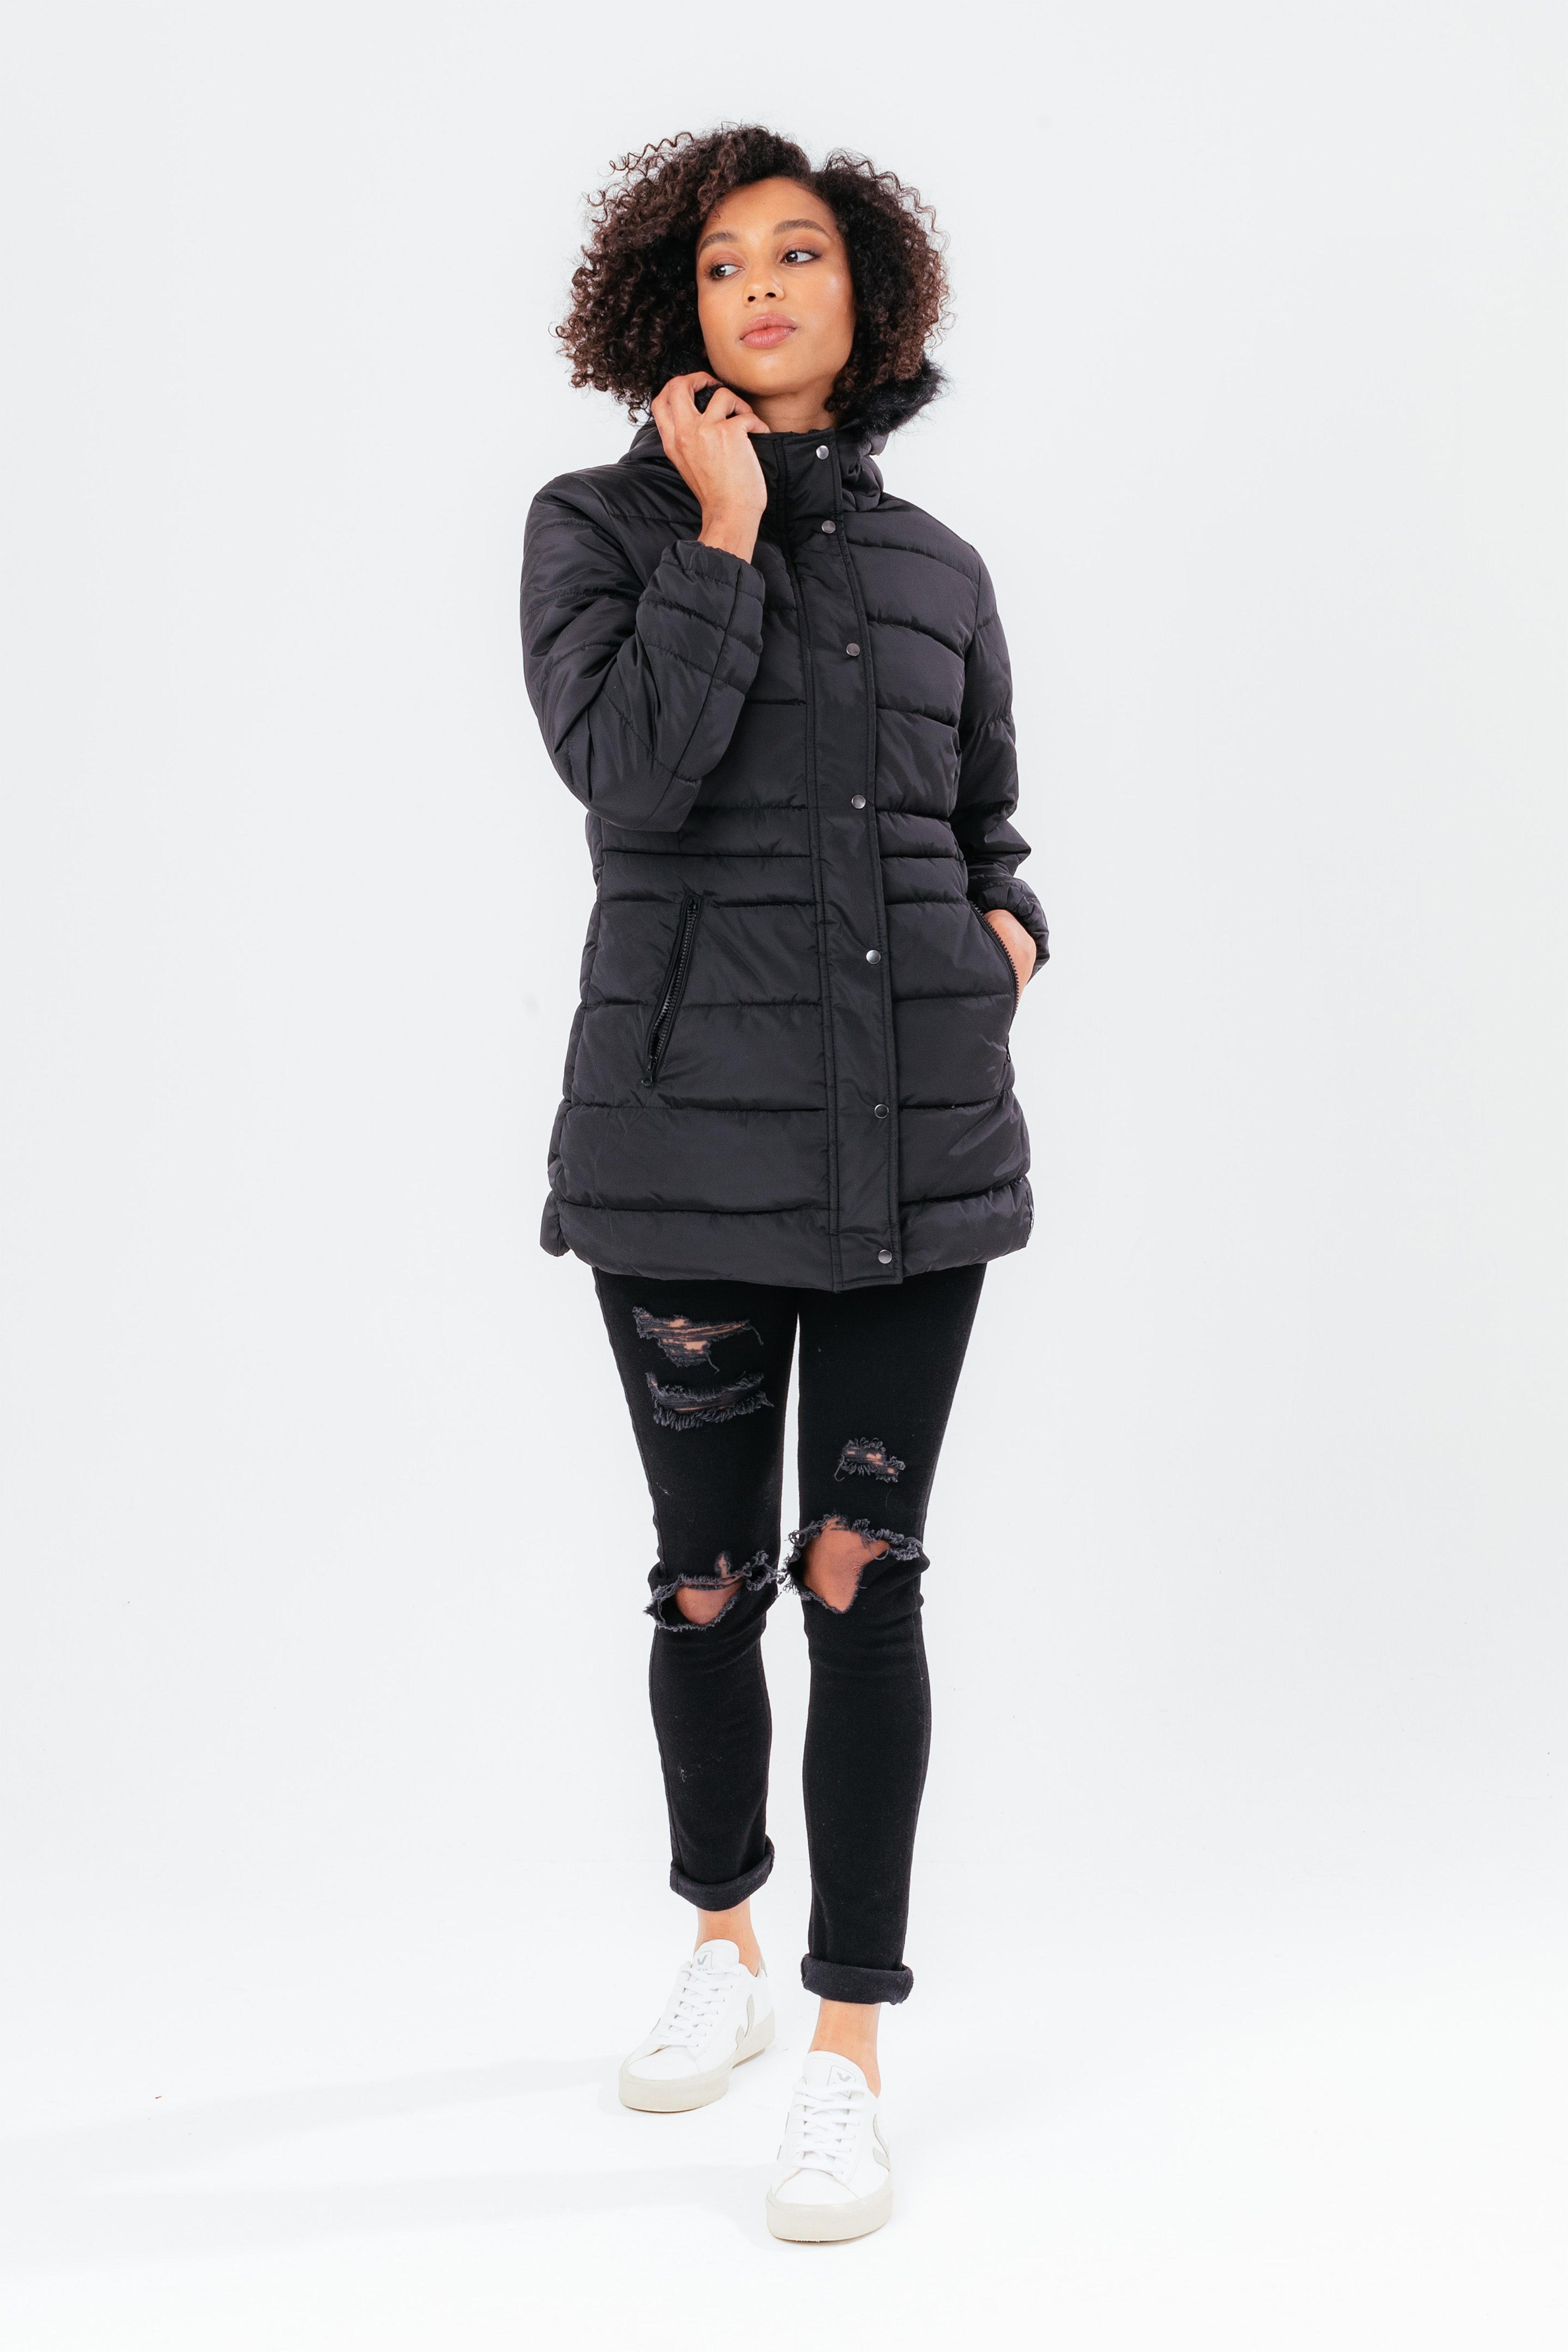 Alternate View 1 of HYPE BLACK MID LENGTH WOMEN'S PADDED COAT WITH FUR